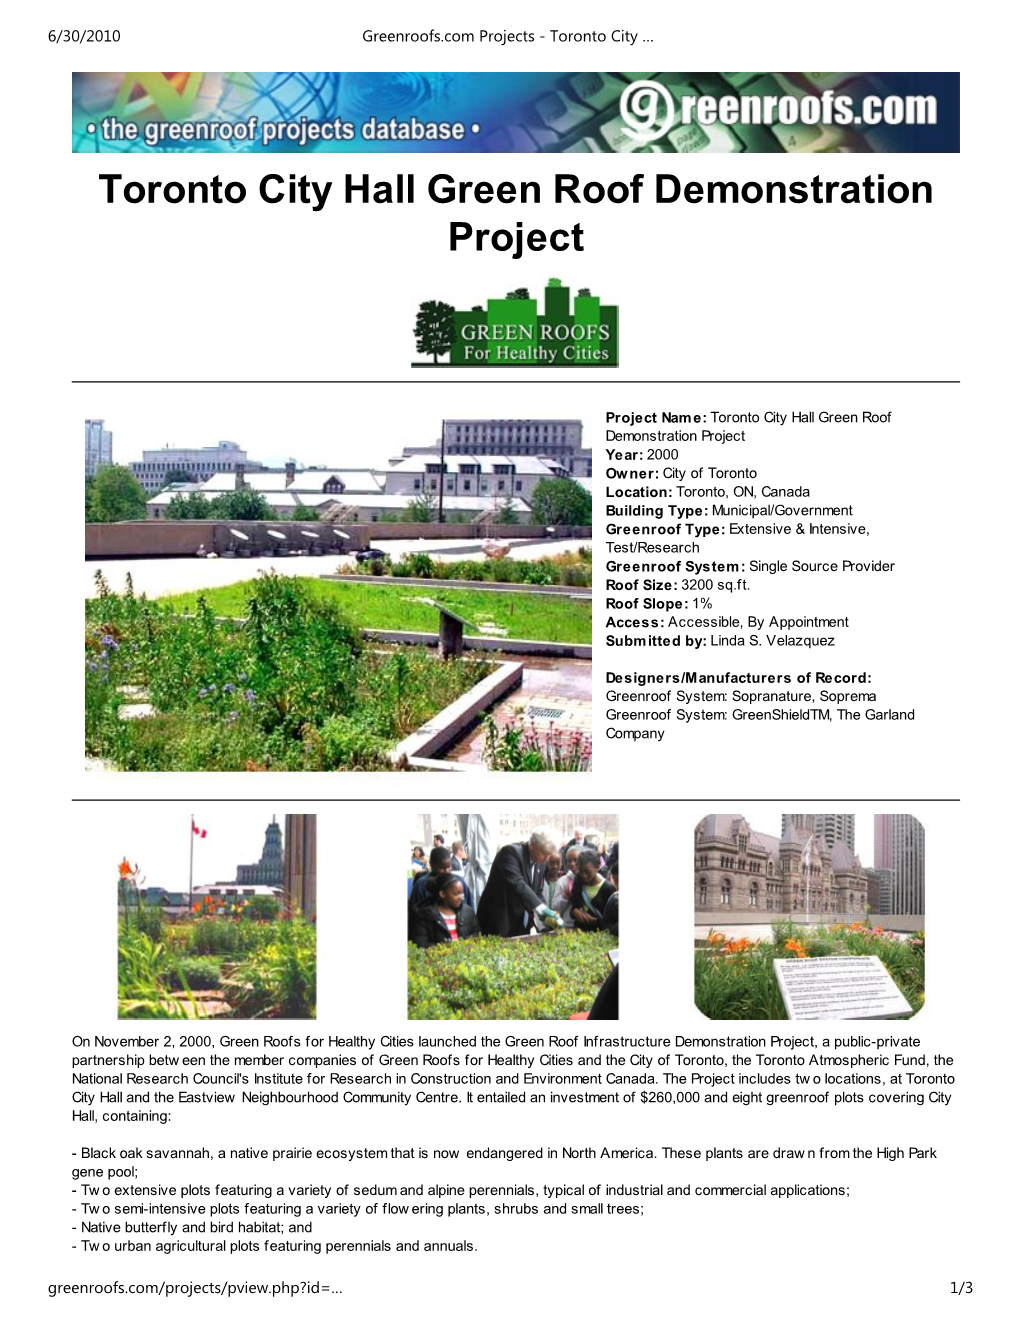 Toronto City Hall Green Roof Demonstration Project